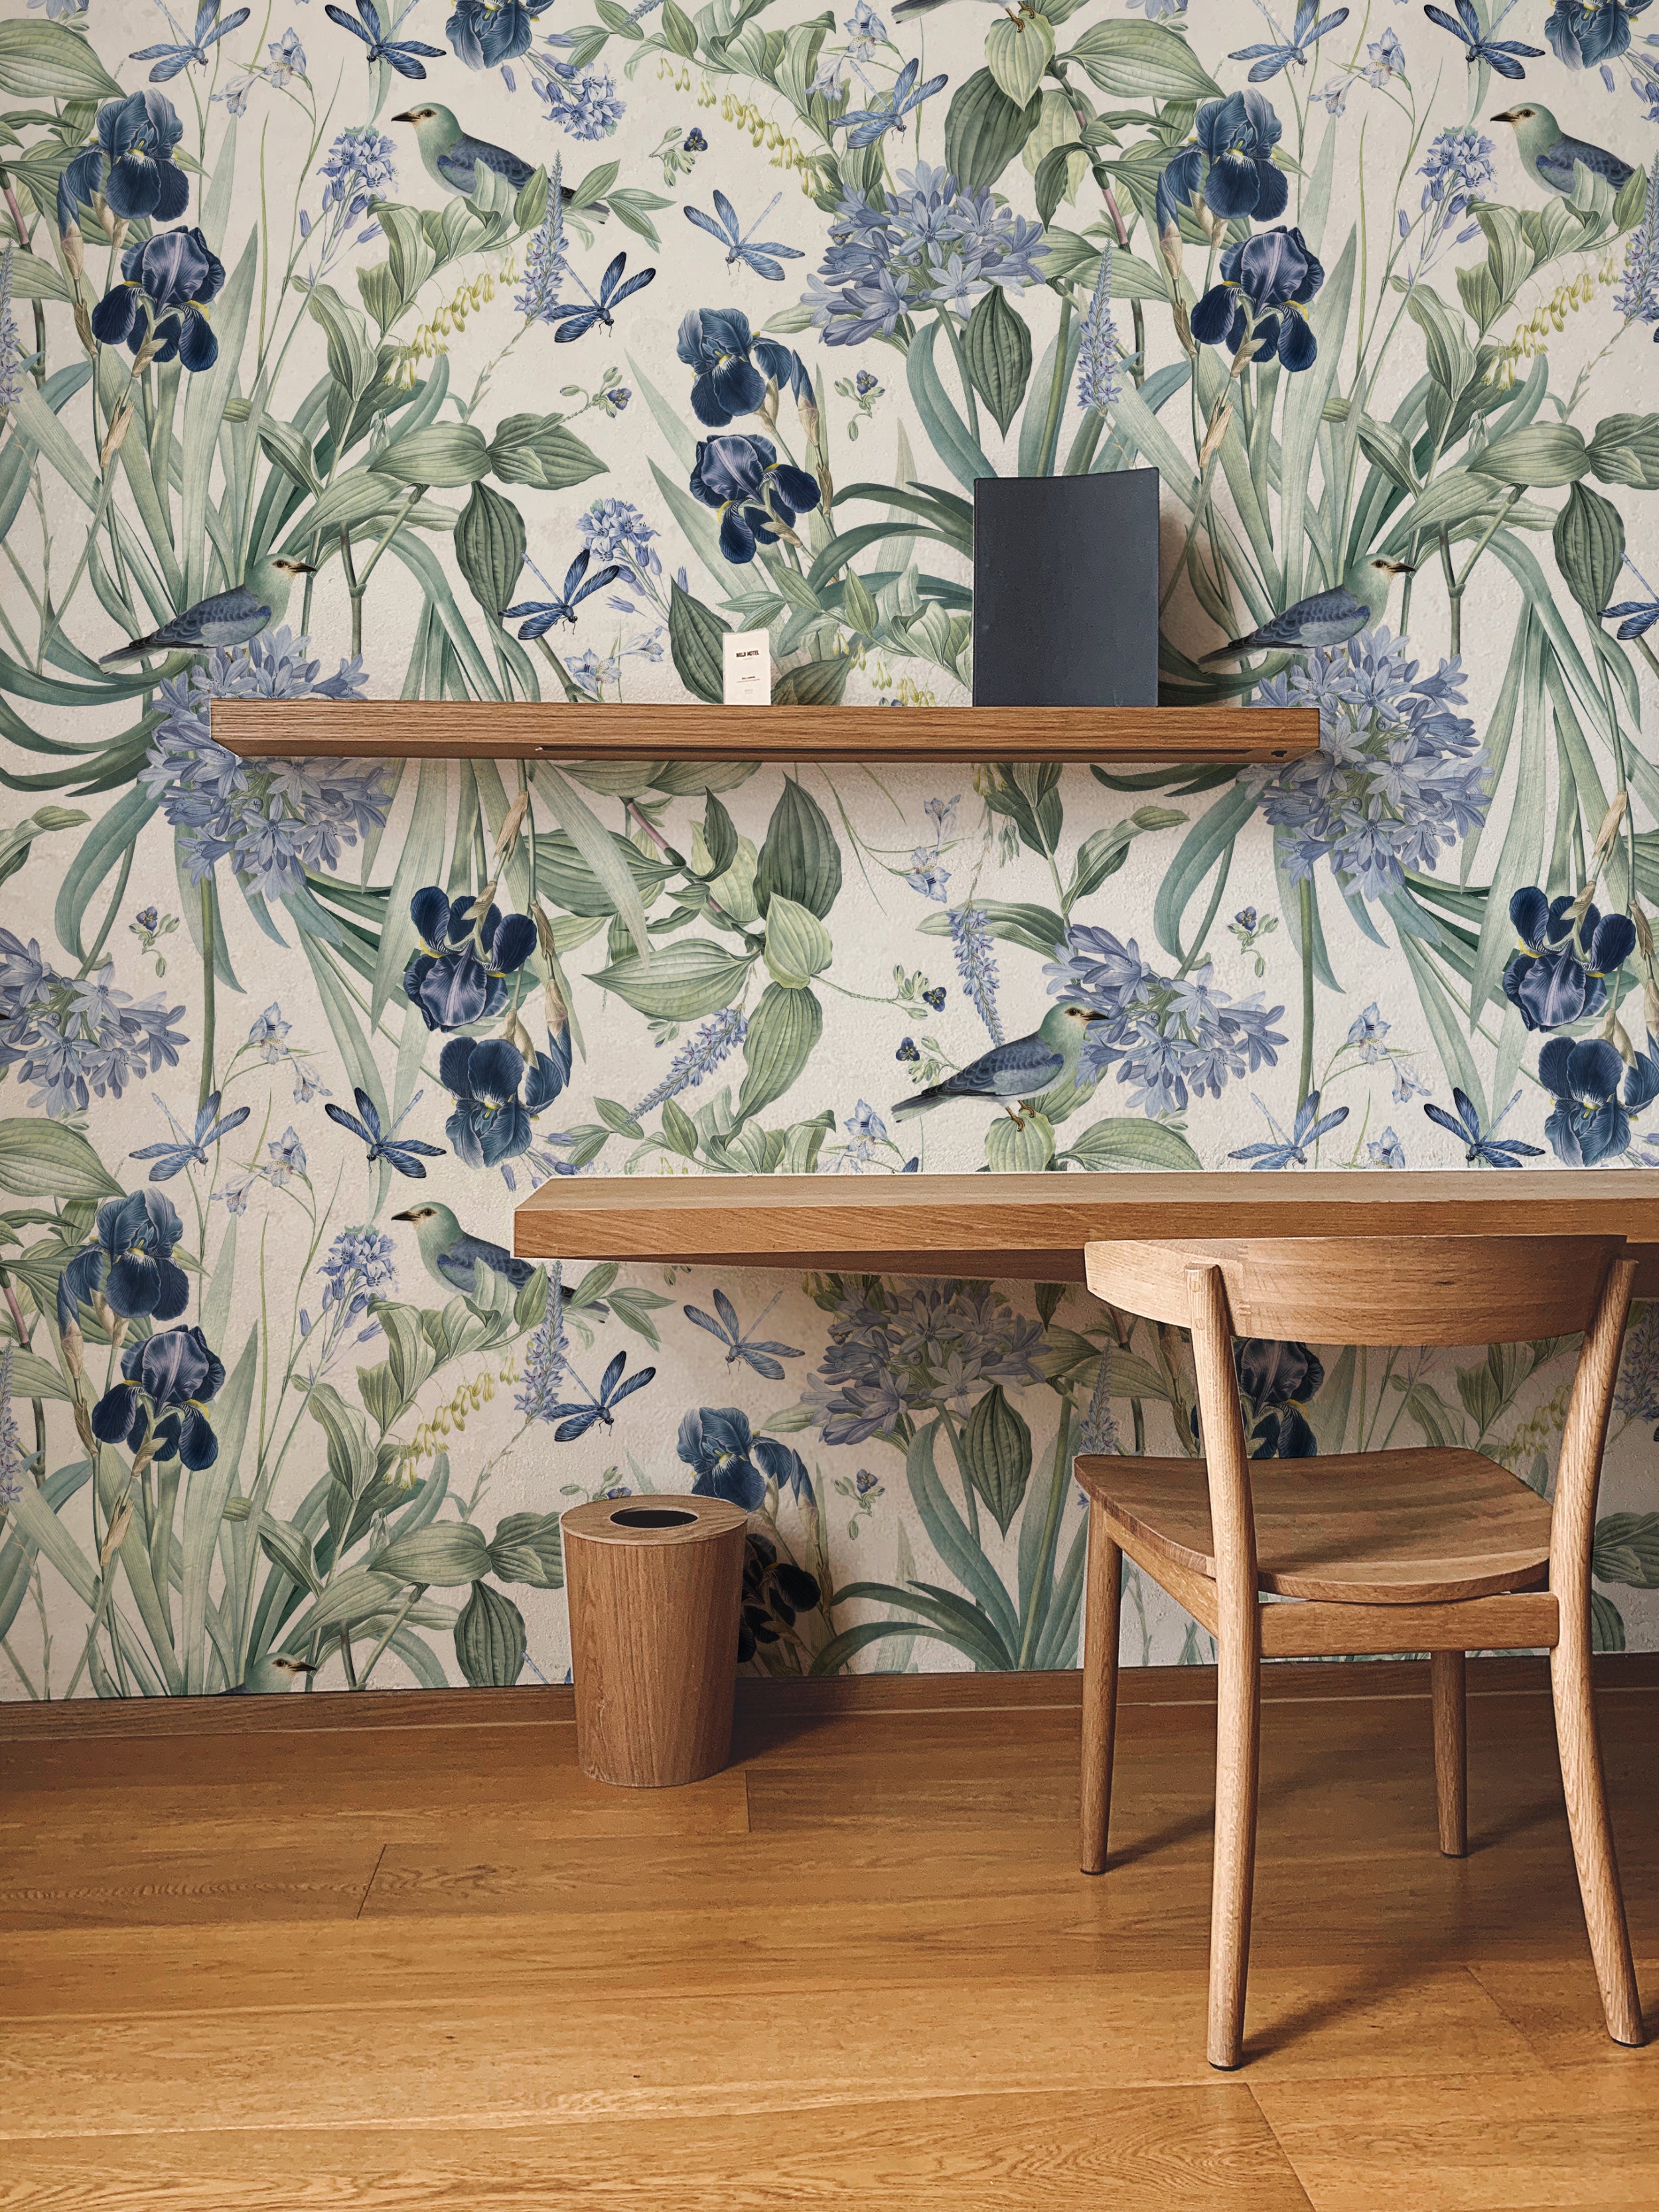 An elegant workspace featuring the 'Mint Floral Wallpaper - 50"', which showcases lush botanical prints with deep blue flowers and light green foliage, complemented by a wooden desk, chair, and shelving that enhances the natural theme.